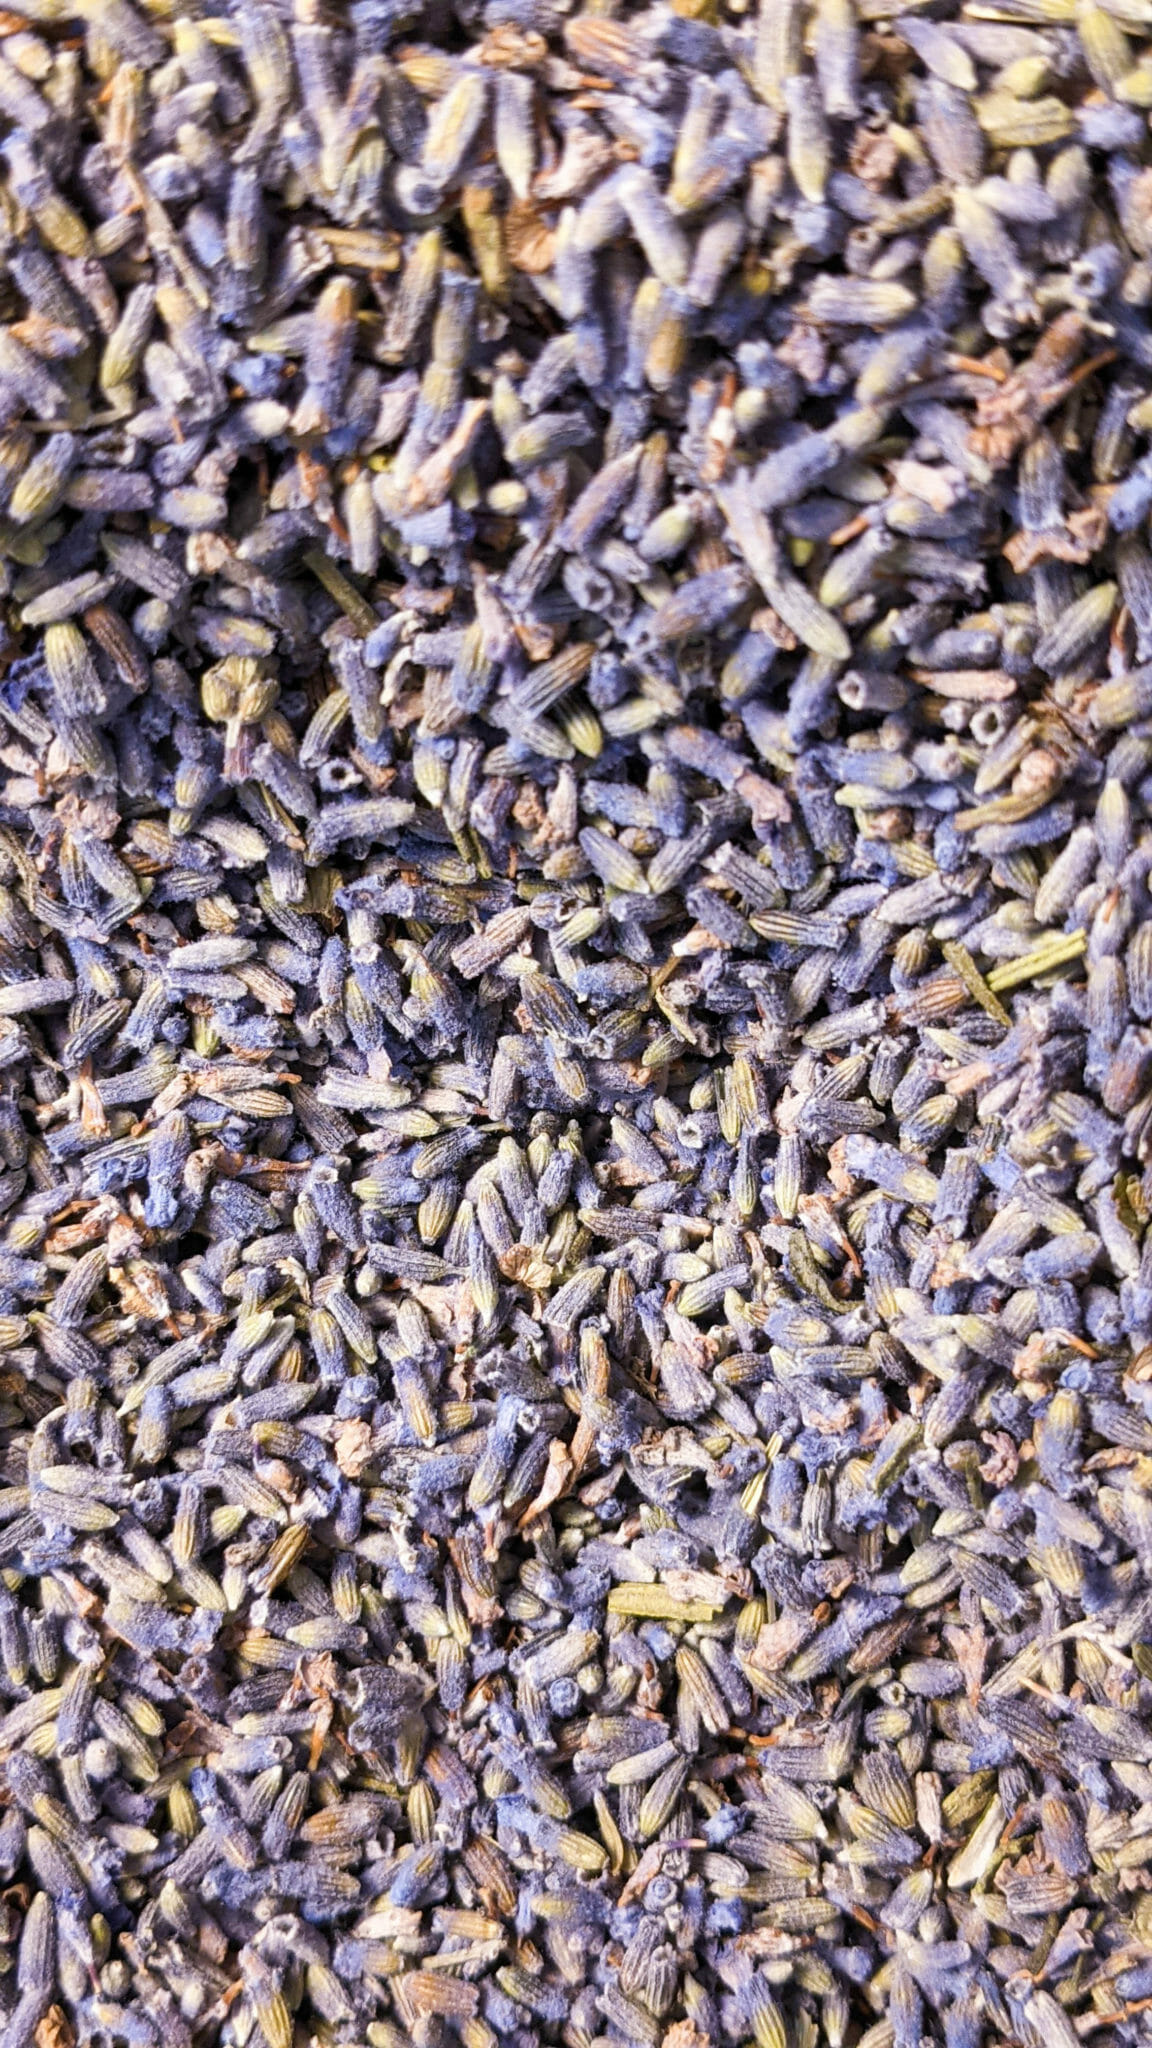 Lavender texture (1 of 2)